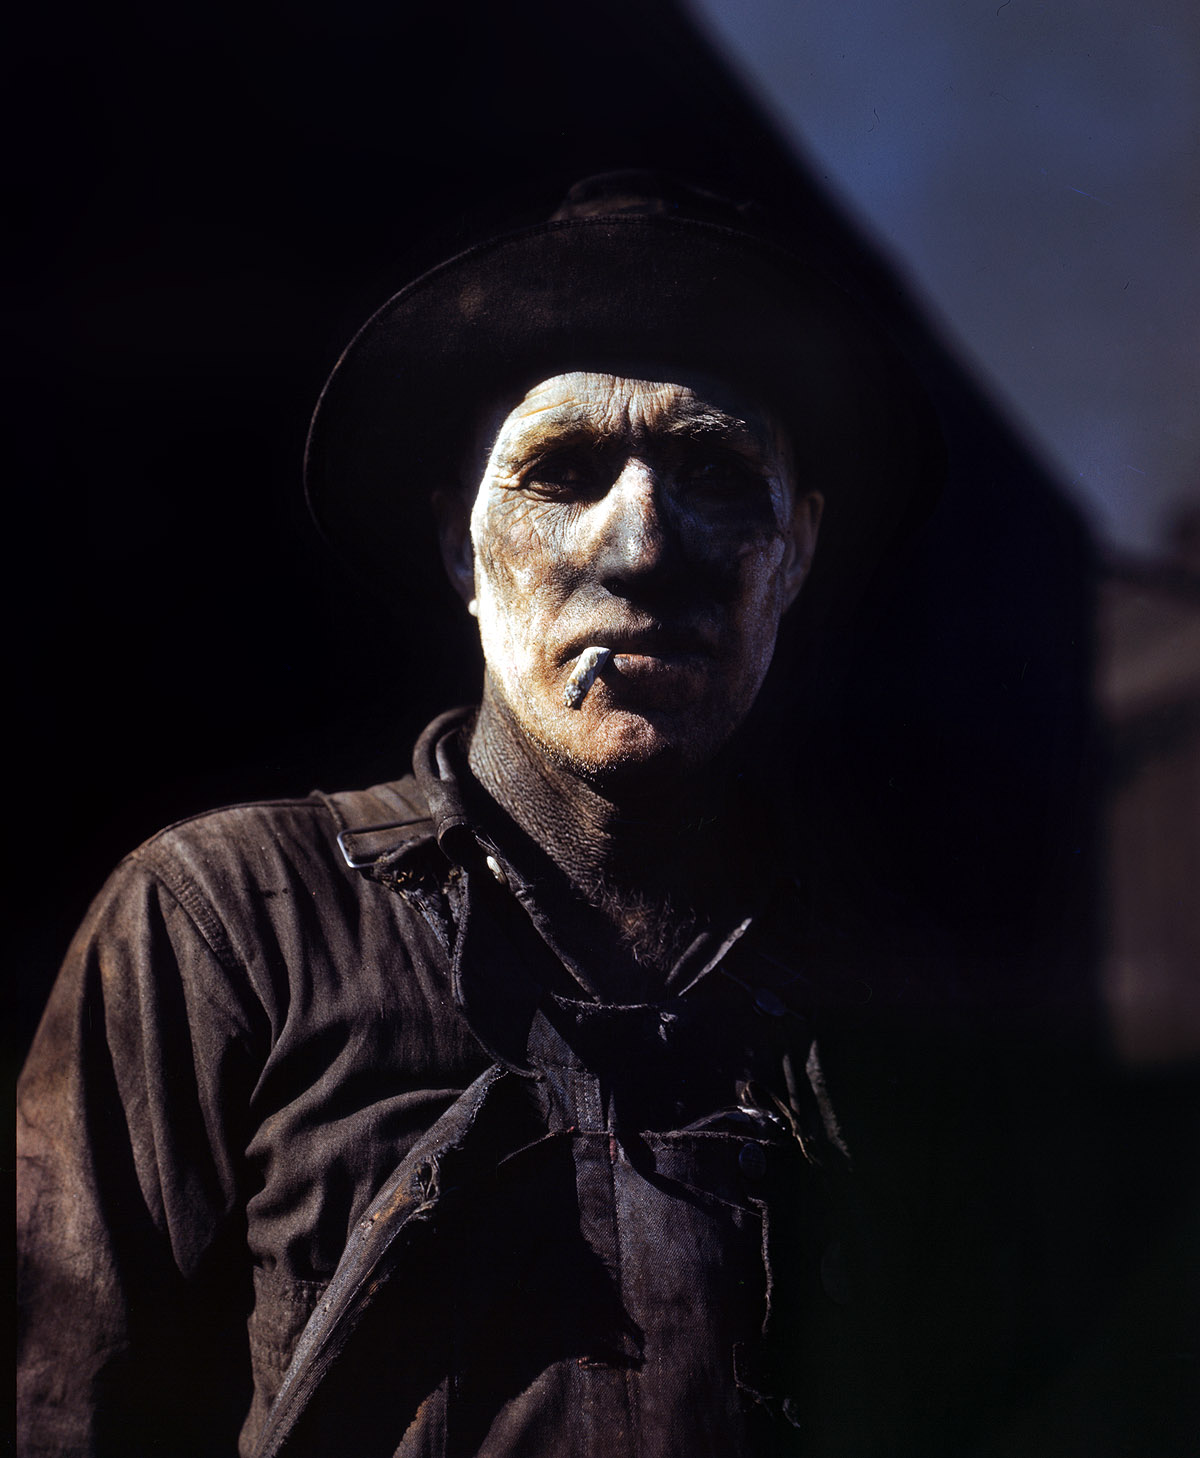 1942. "Worker at carbon black plant. Sunray, Texas." 4x5 Kodachrome transparency by John Vachon. View full size. 